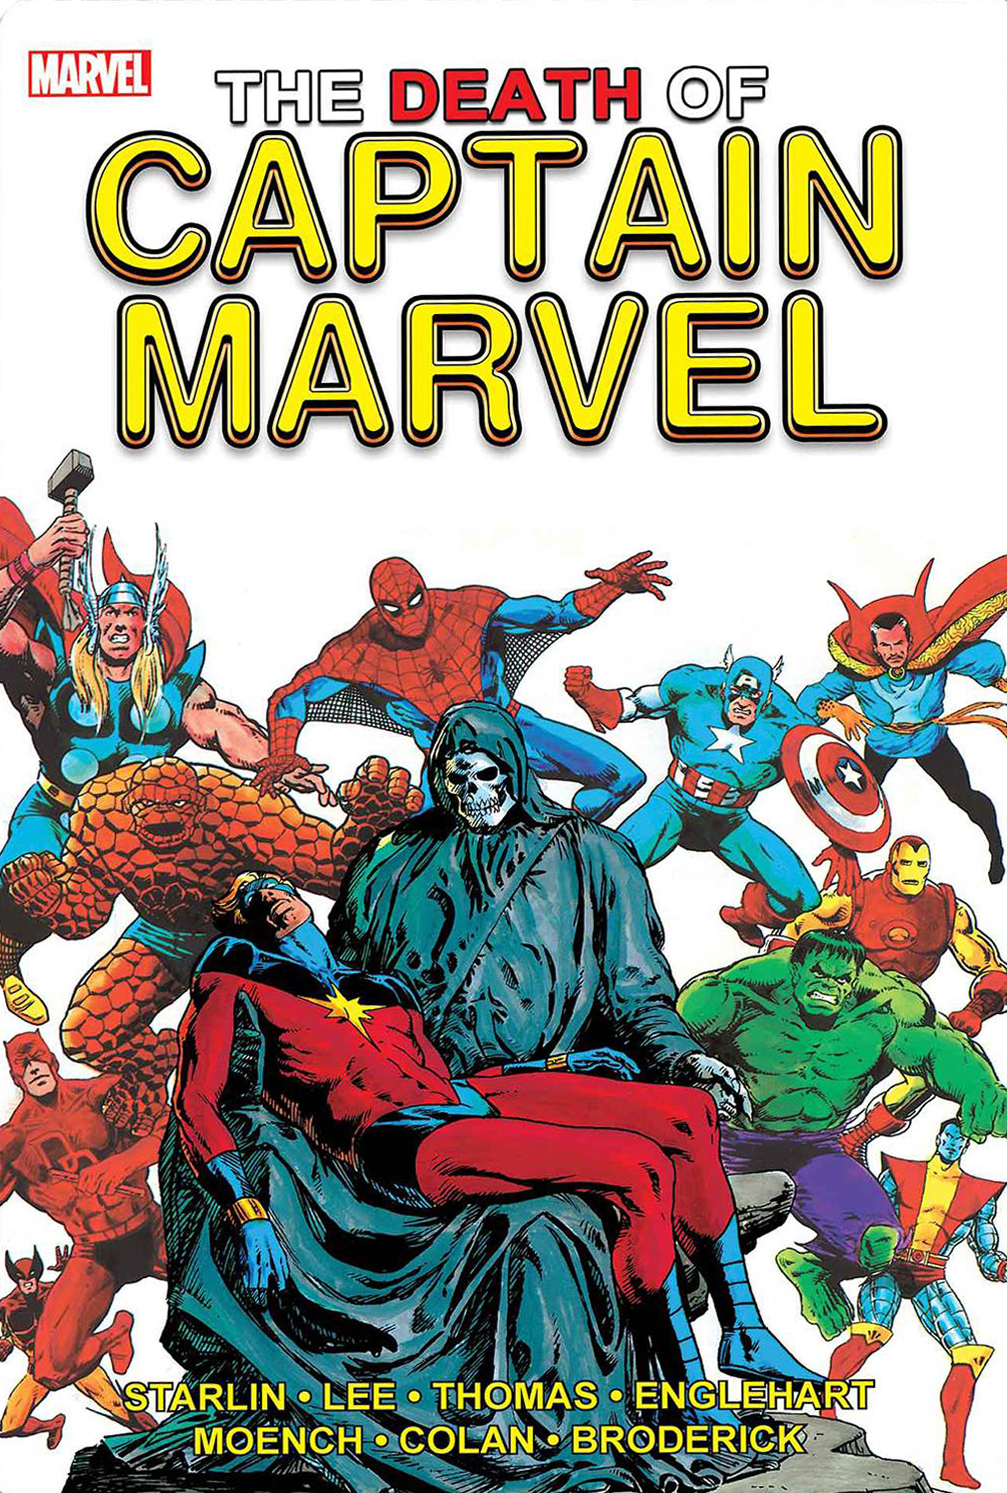 Death Of Captain Marvel Gallery Edition HC